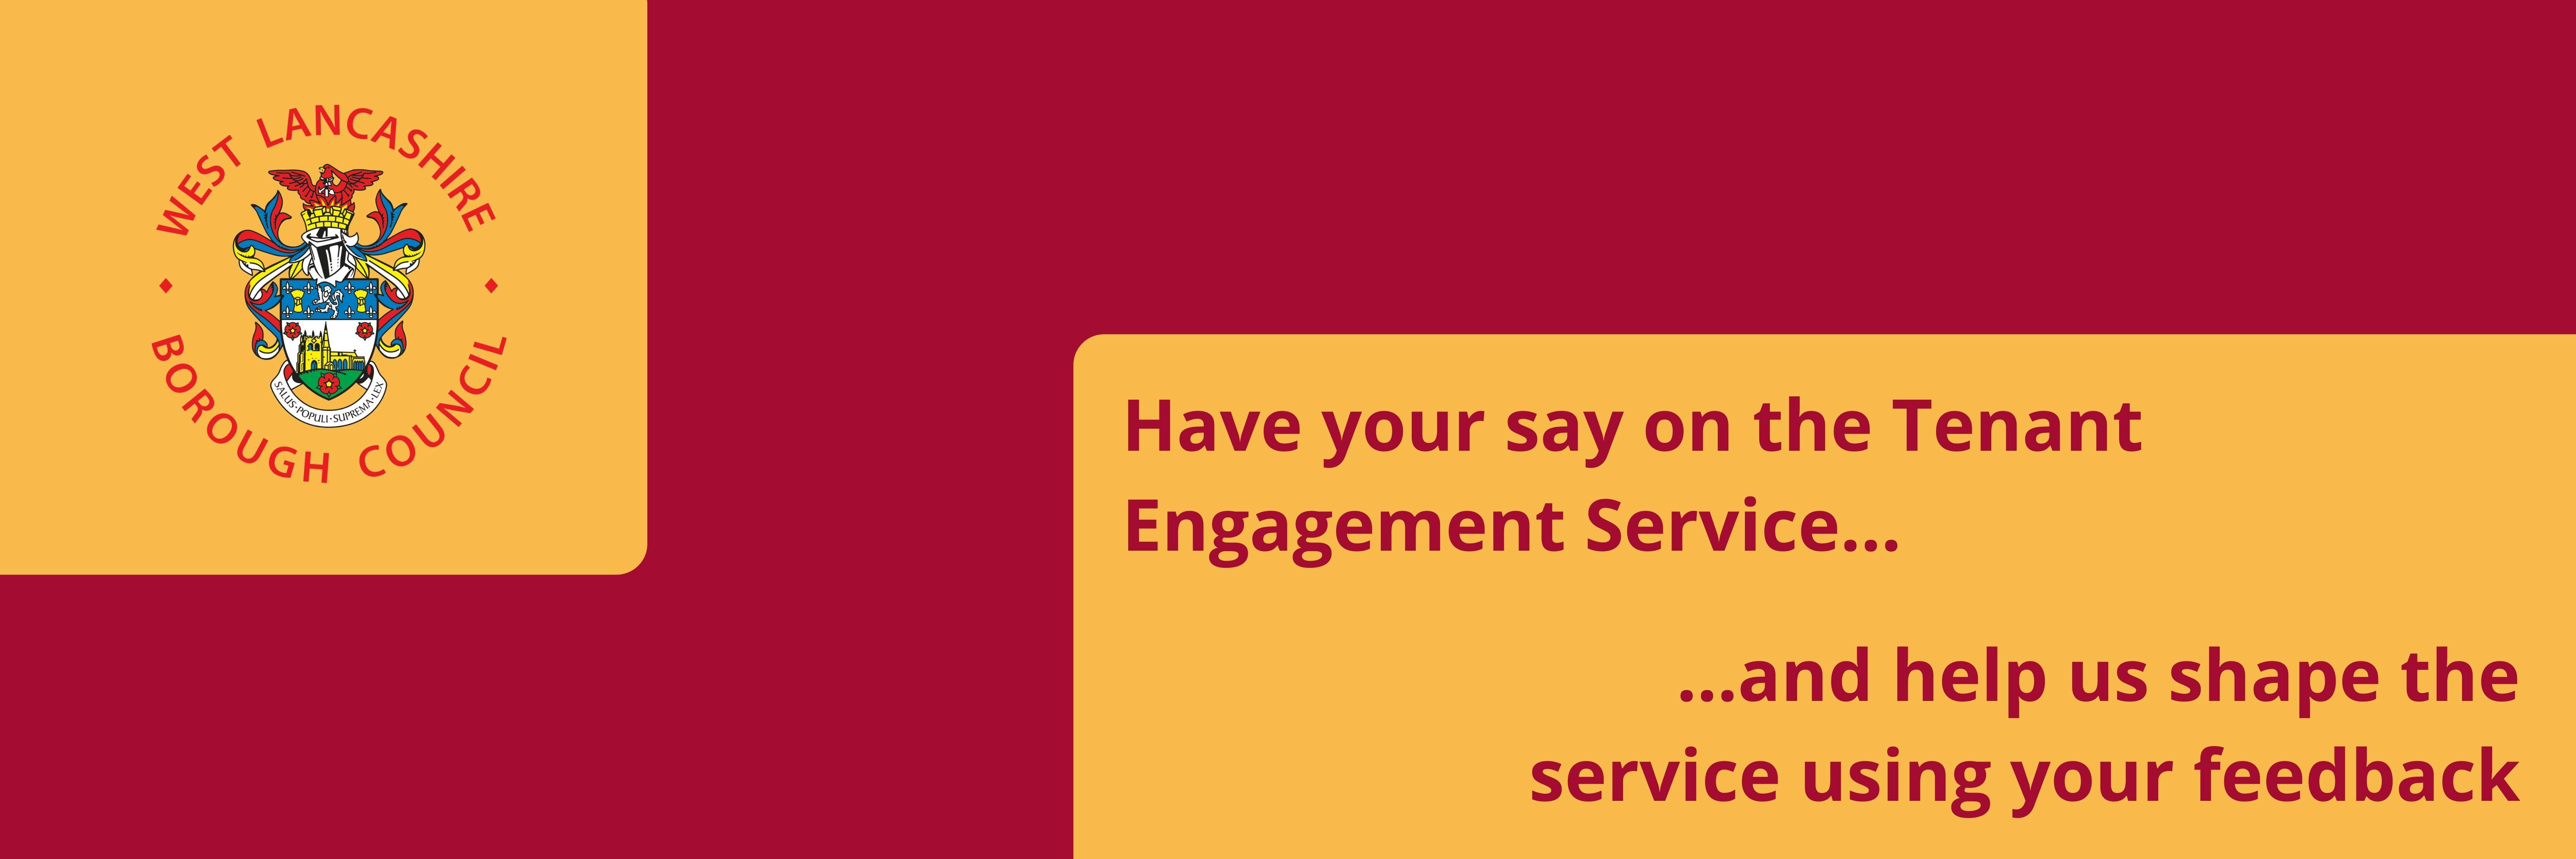 Have your say on the Tenant Engagement Service, and help us shape the service using your feedback